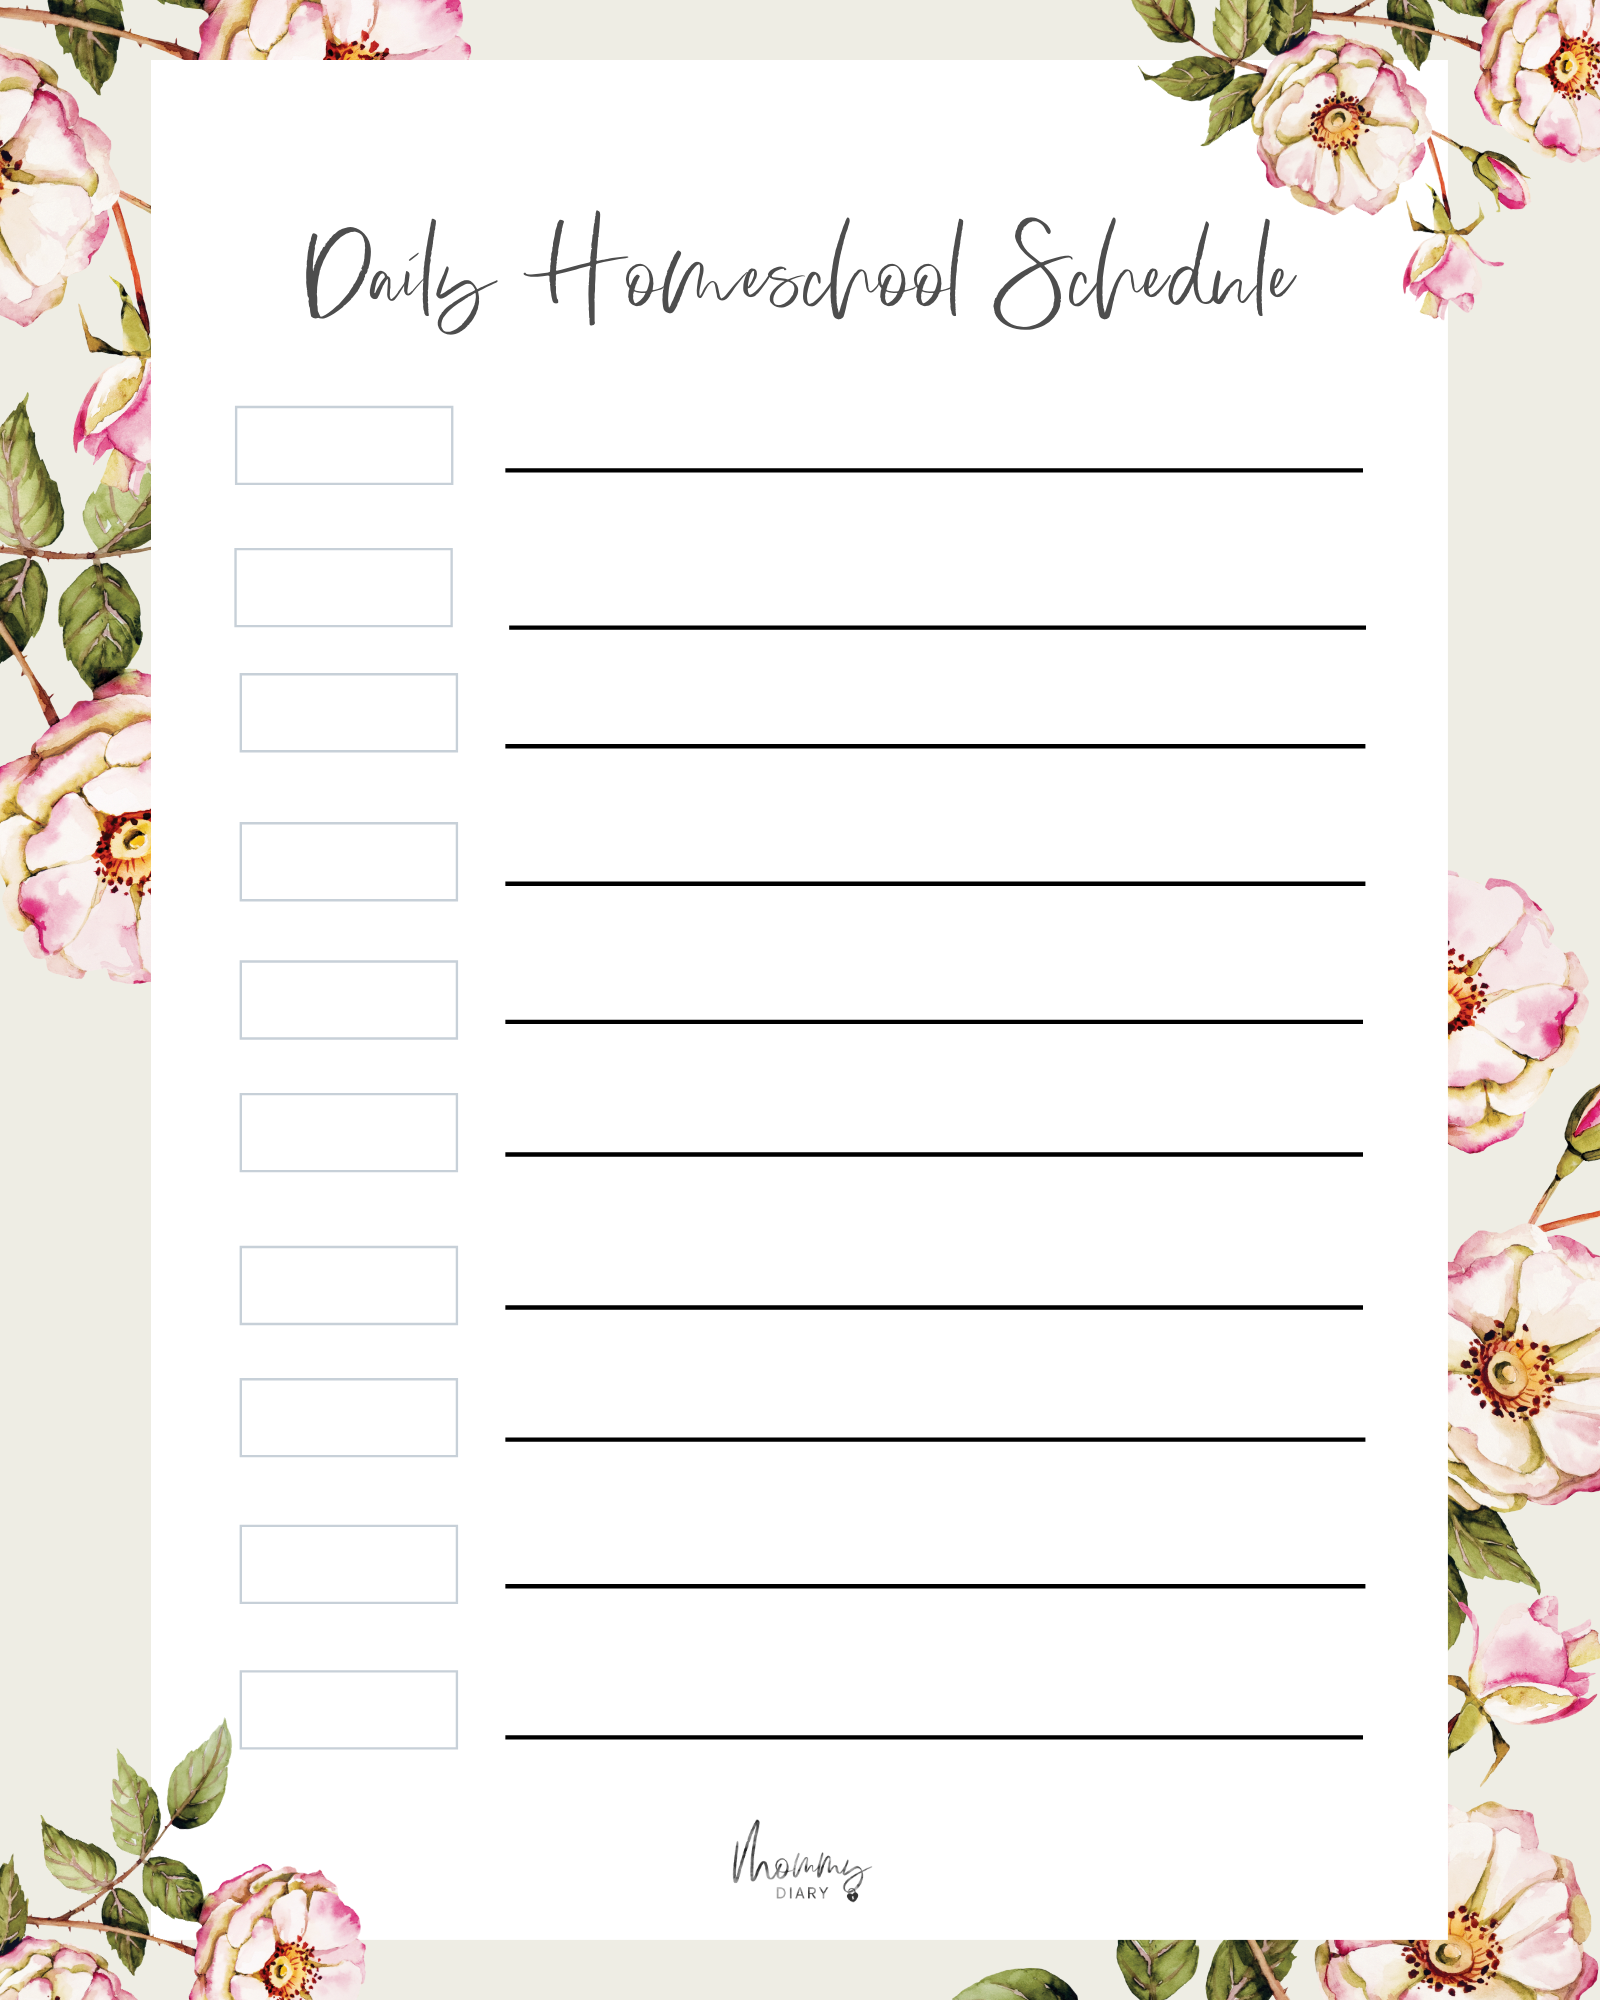 Mommy Diary Homeschool Schedule Template